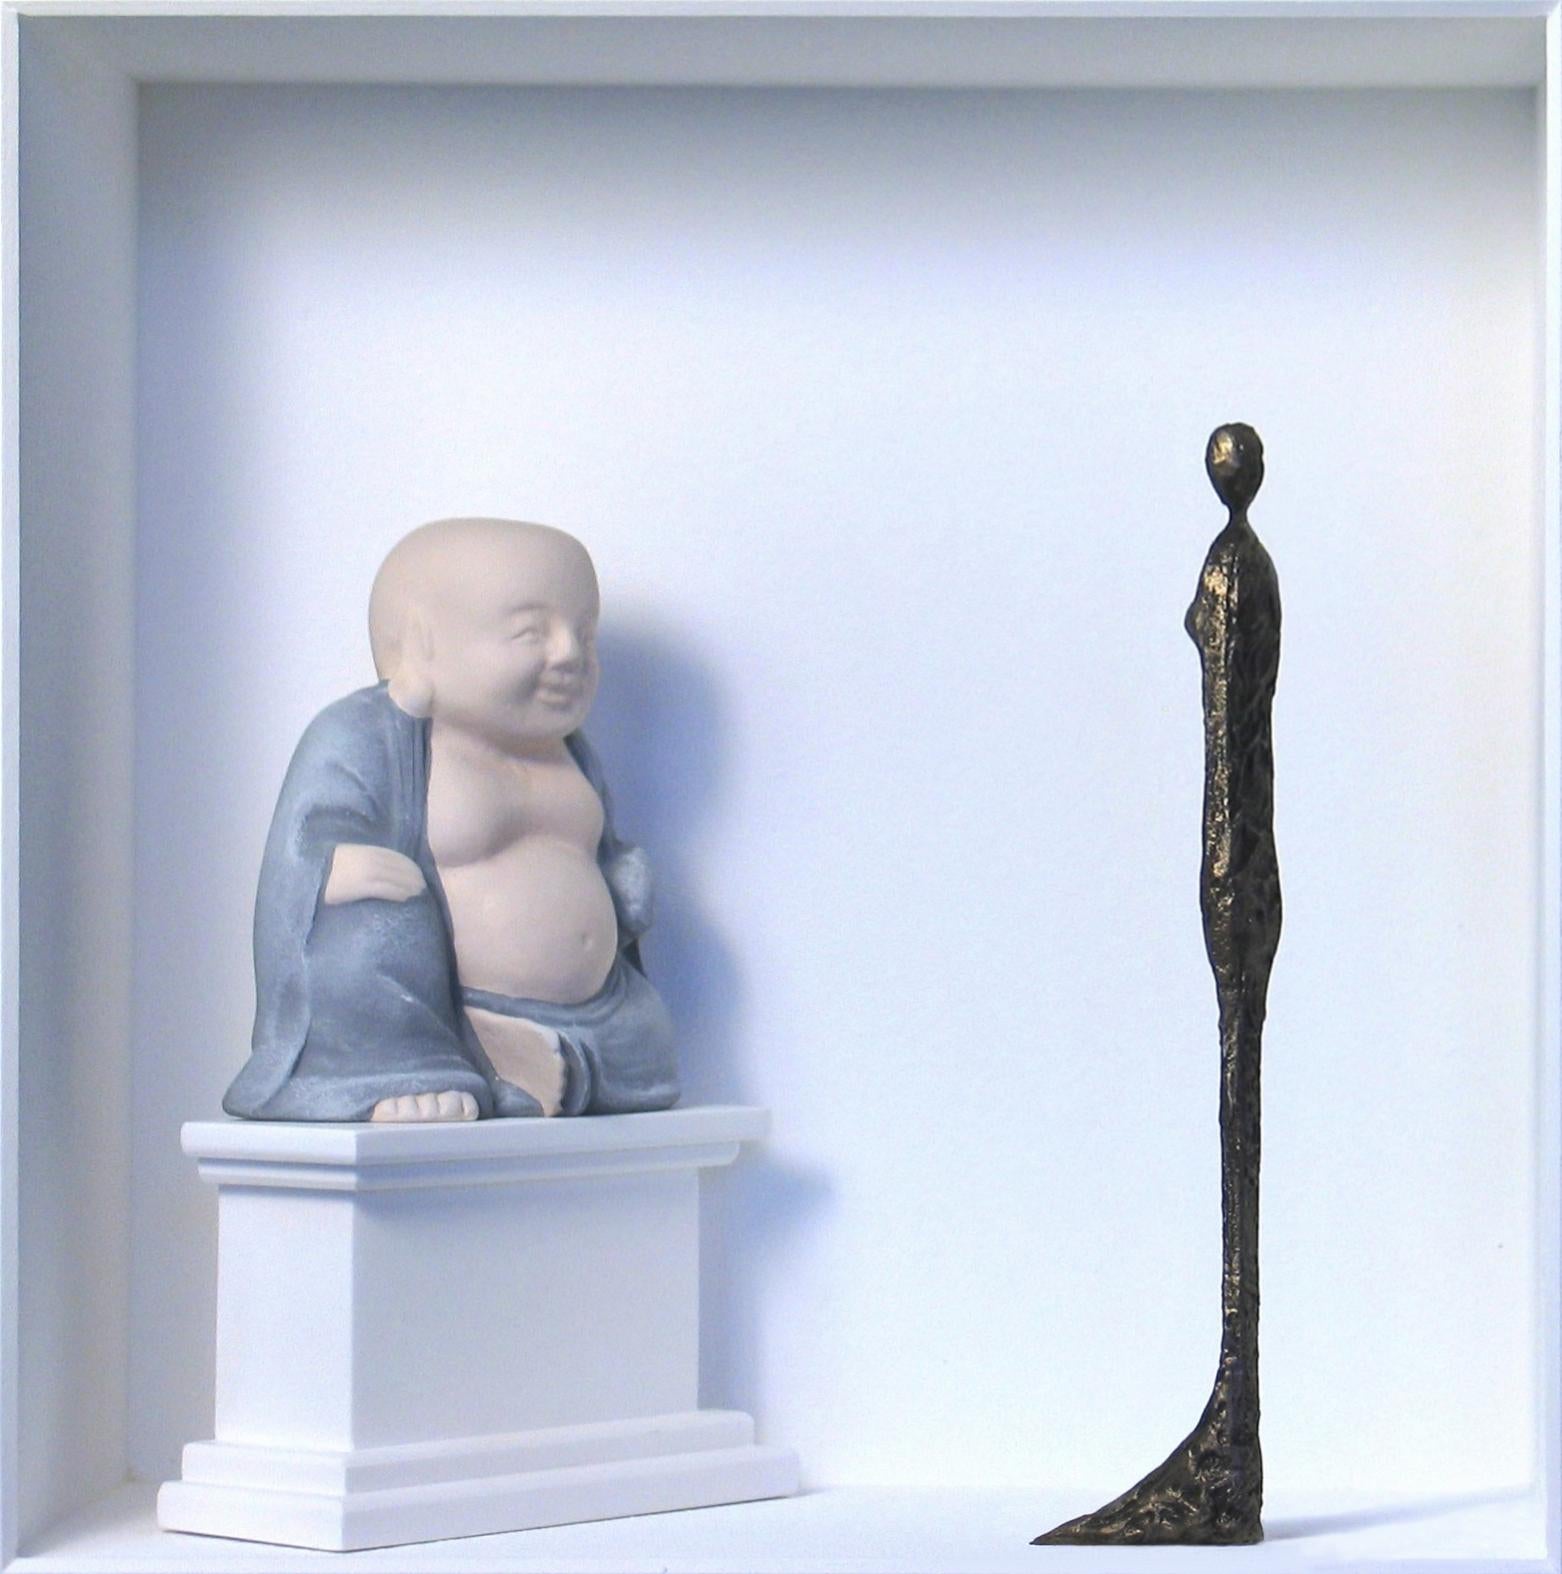 Giacometti meets Buddha - contemporary art work homage to sculptor Giacometti - Mixed Media Art by Volker Kuhn